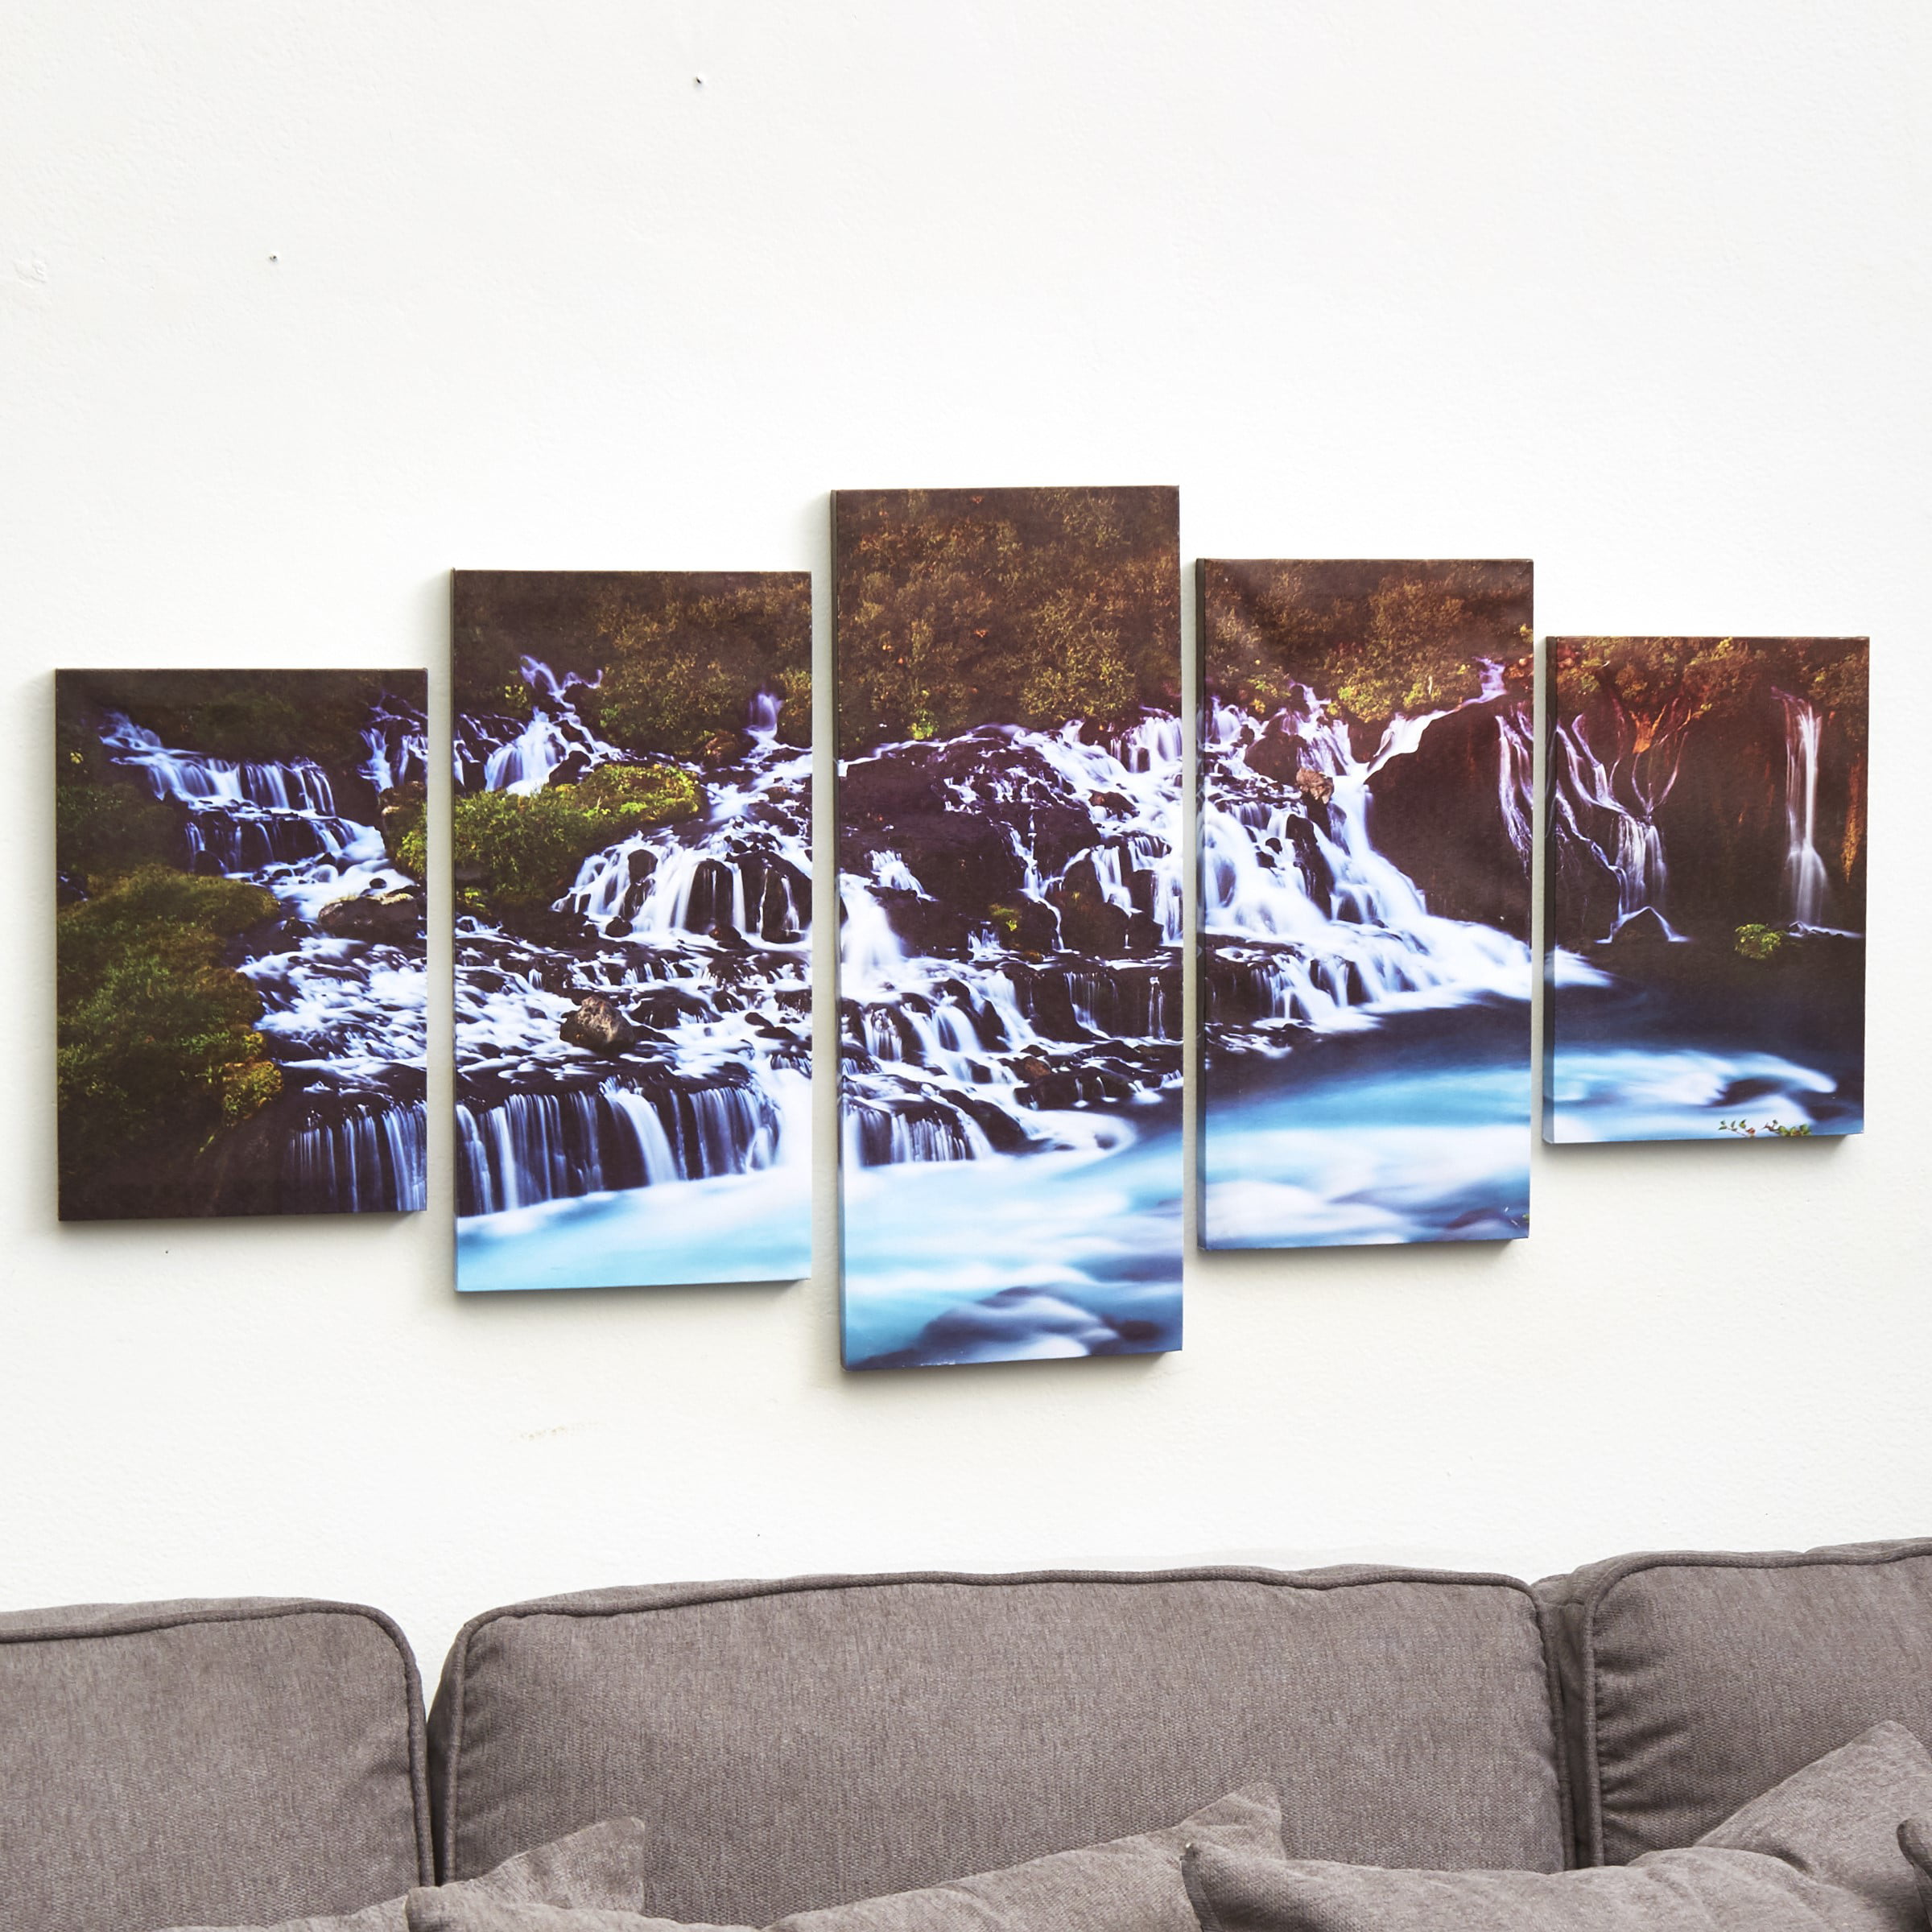 US Stock 5 Pcs Modern Canvas Oil Painting Wall Art Home Picture Print Decor 